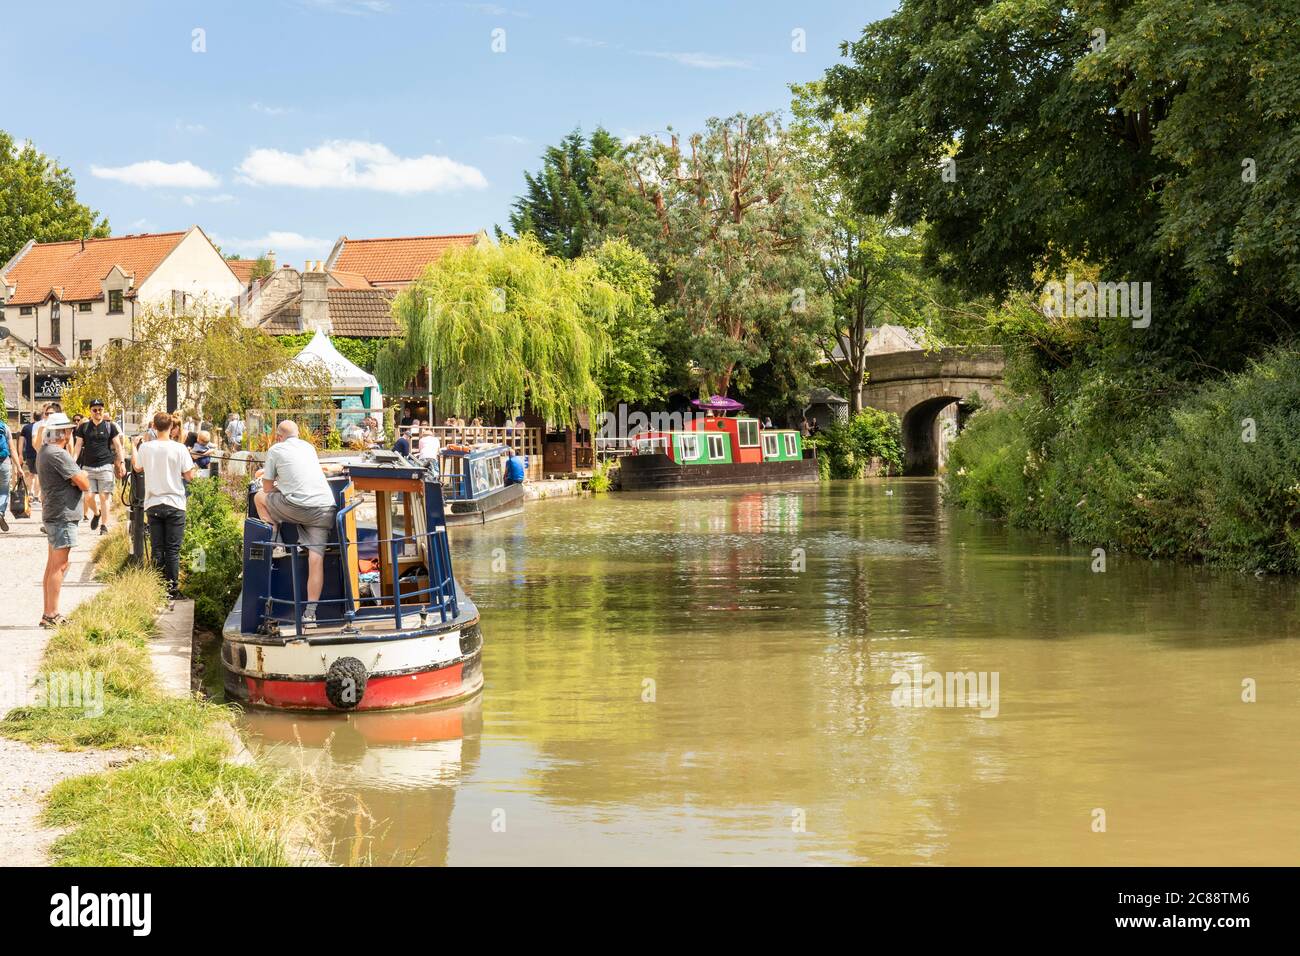 Canal boat moored near The Lock Inn on The Kennet and Avon Canal in summer at Bradford on Avon, Wiltshire, England, UK Stock Photo